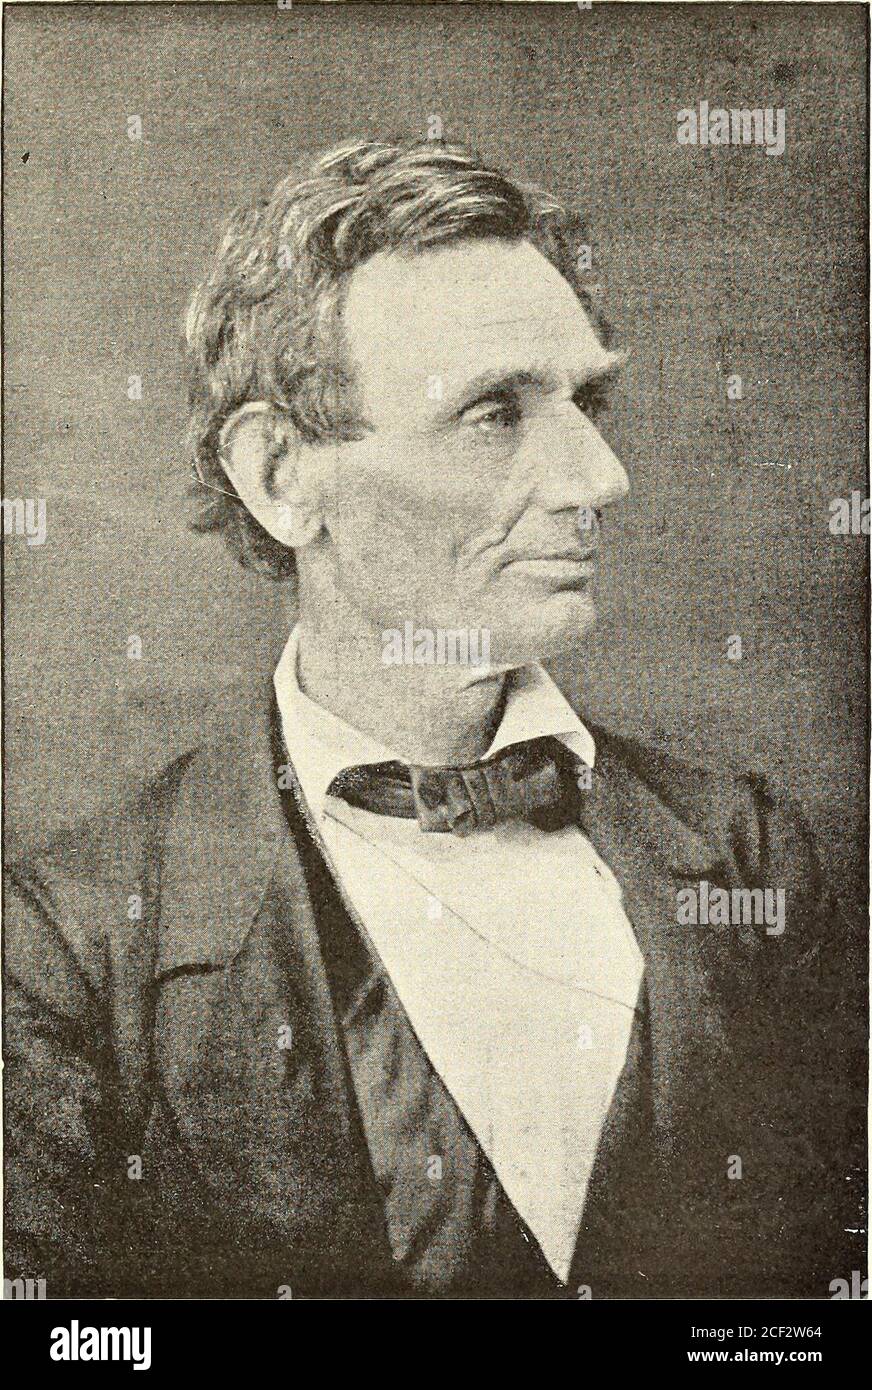 . The Lincoln autographic album : embracing likewise the favorite poetry of Abraham Lincoln. CABINET ROOM AT PRESIDENTS MANSION.. %cn**y s^p-^4&lt;^.h&gt; jLv^/ Stock Photo